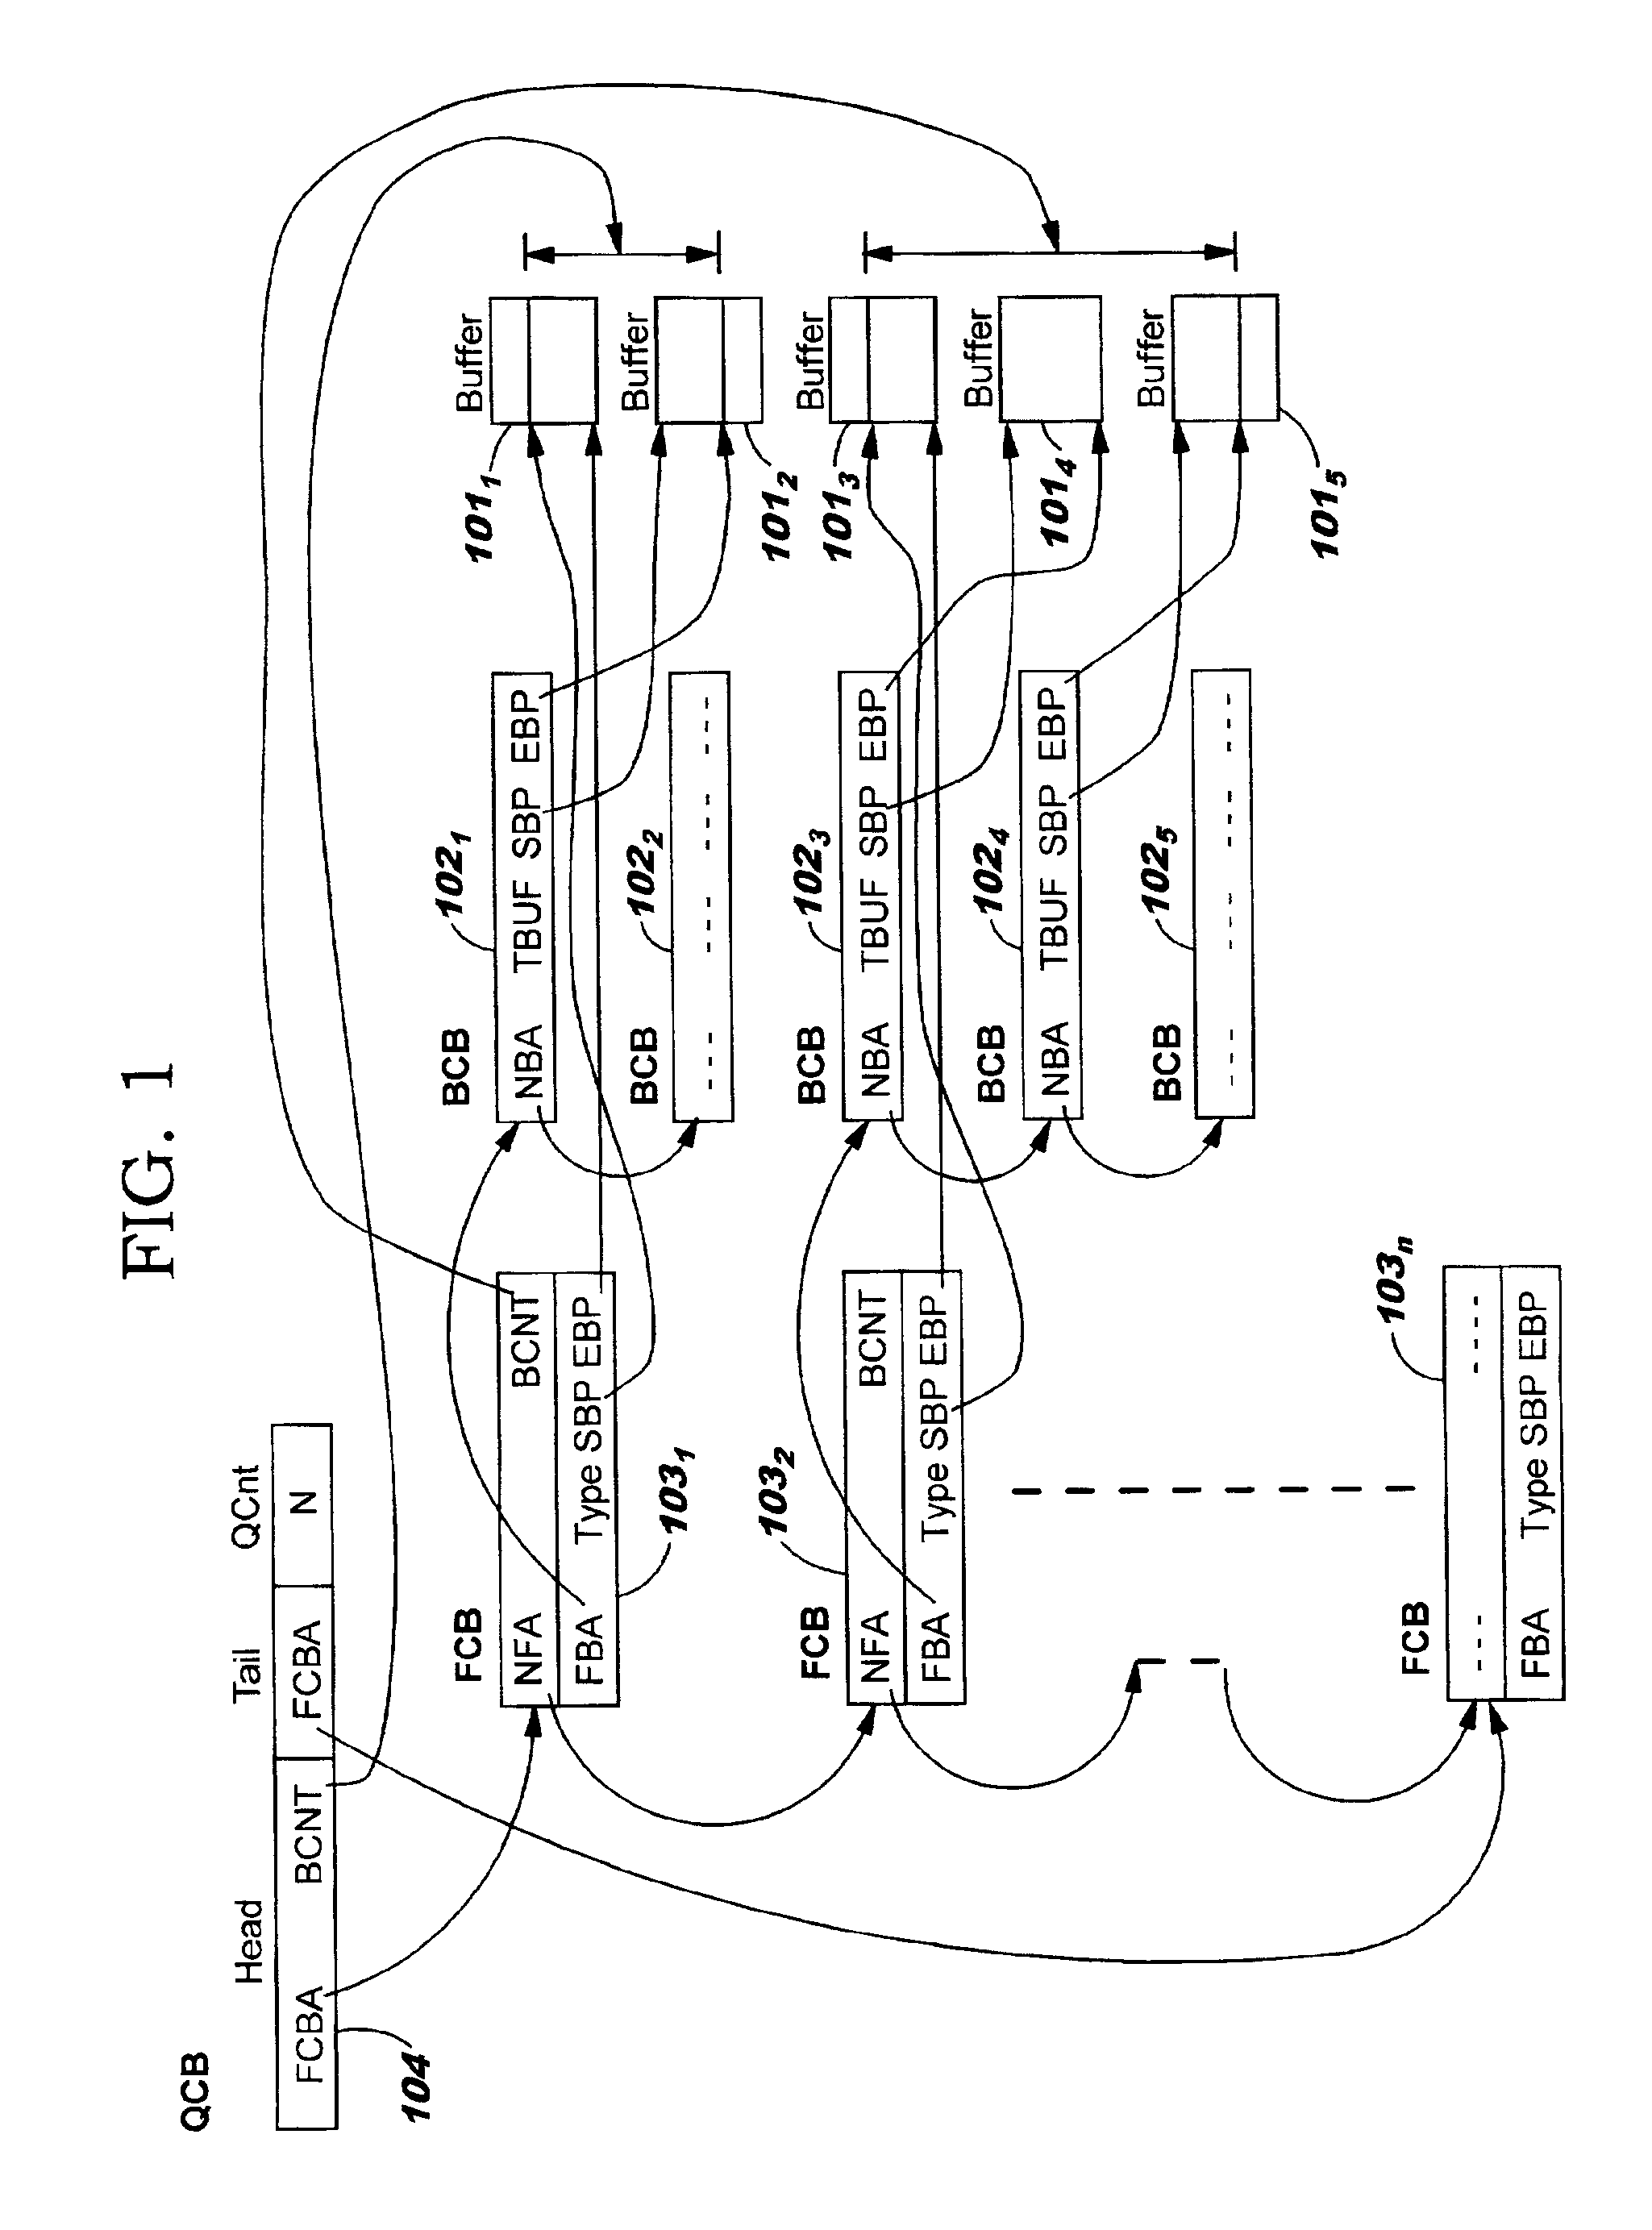 Data structures for efficient processing of IP fragmentation and reassembly